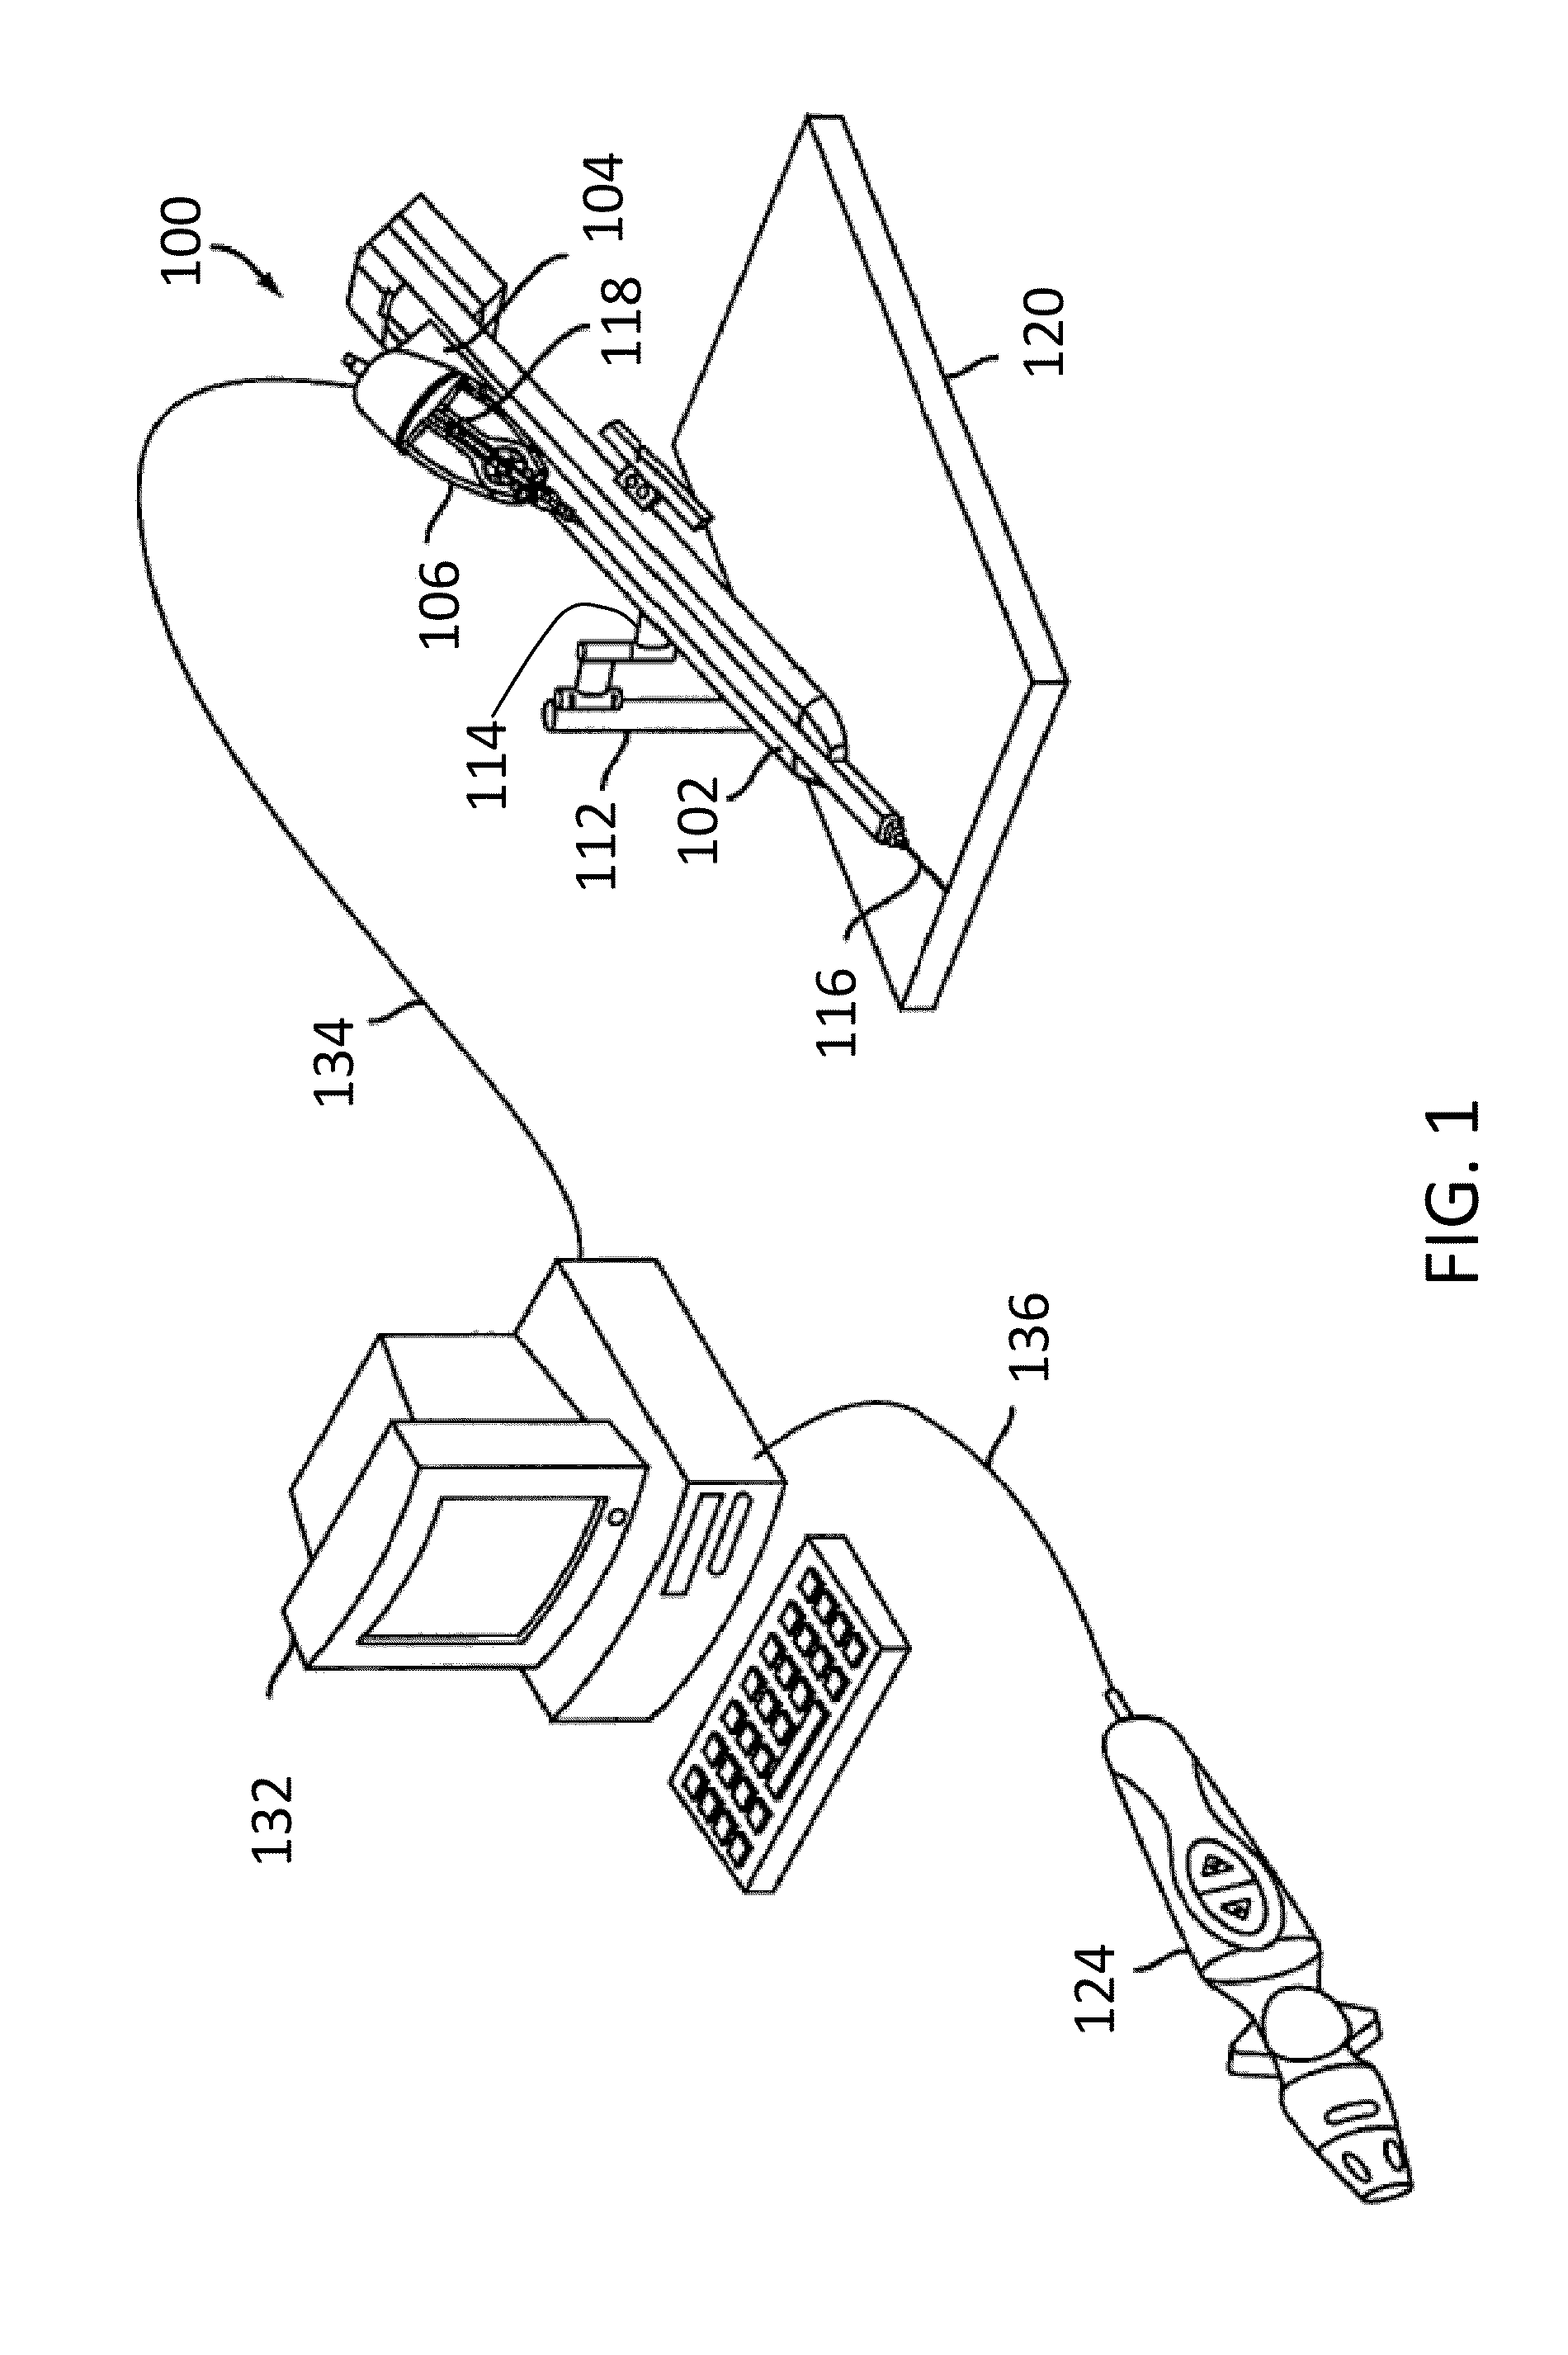 Components and methods for balancing a catheter controller system with a counterweight